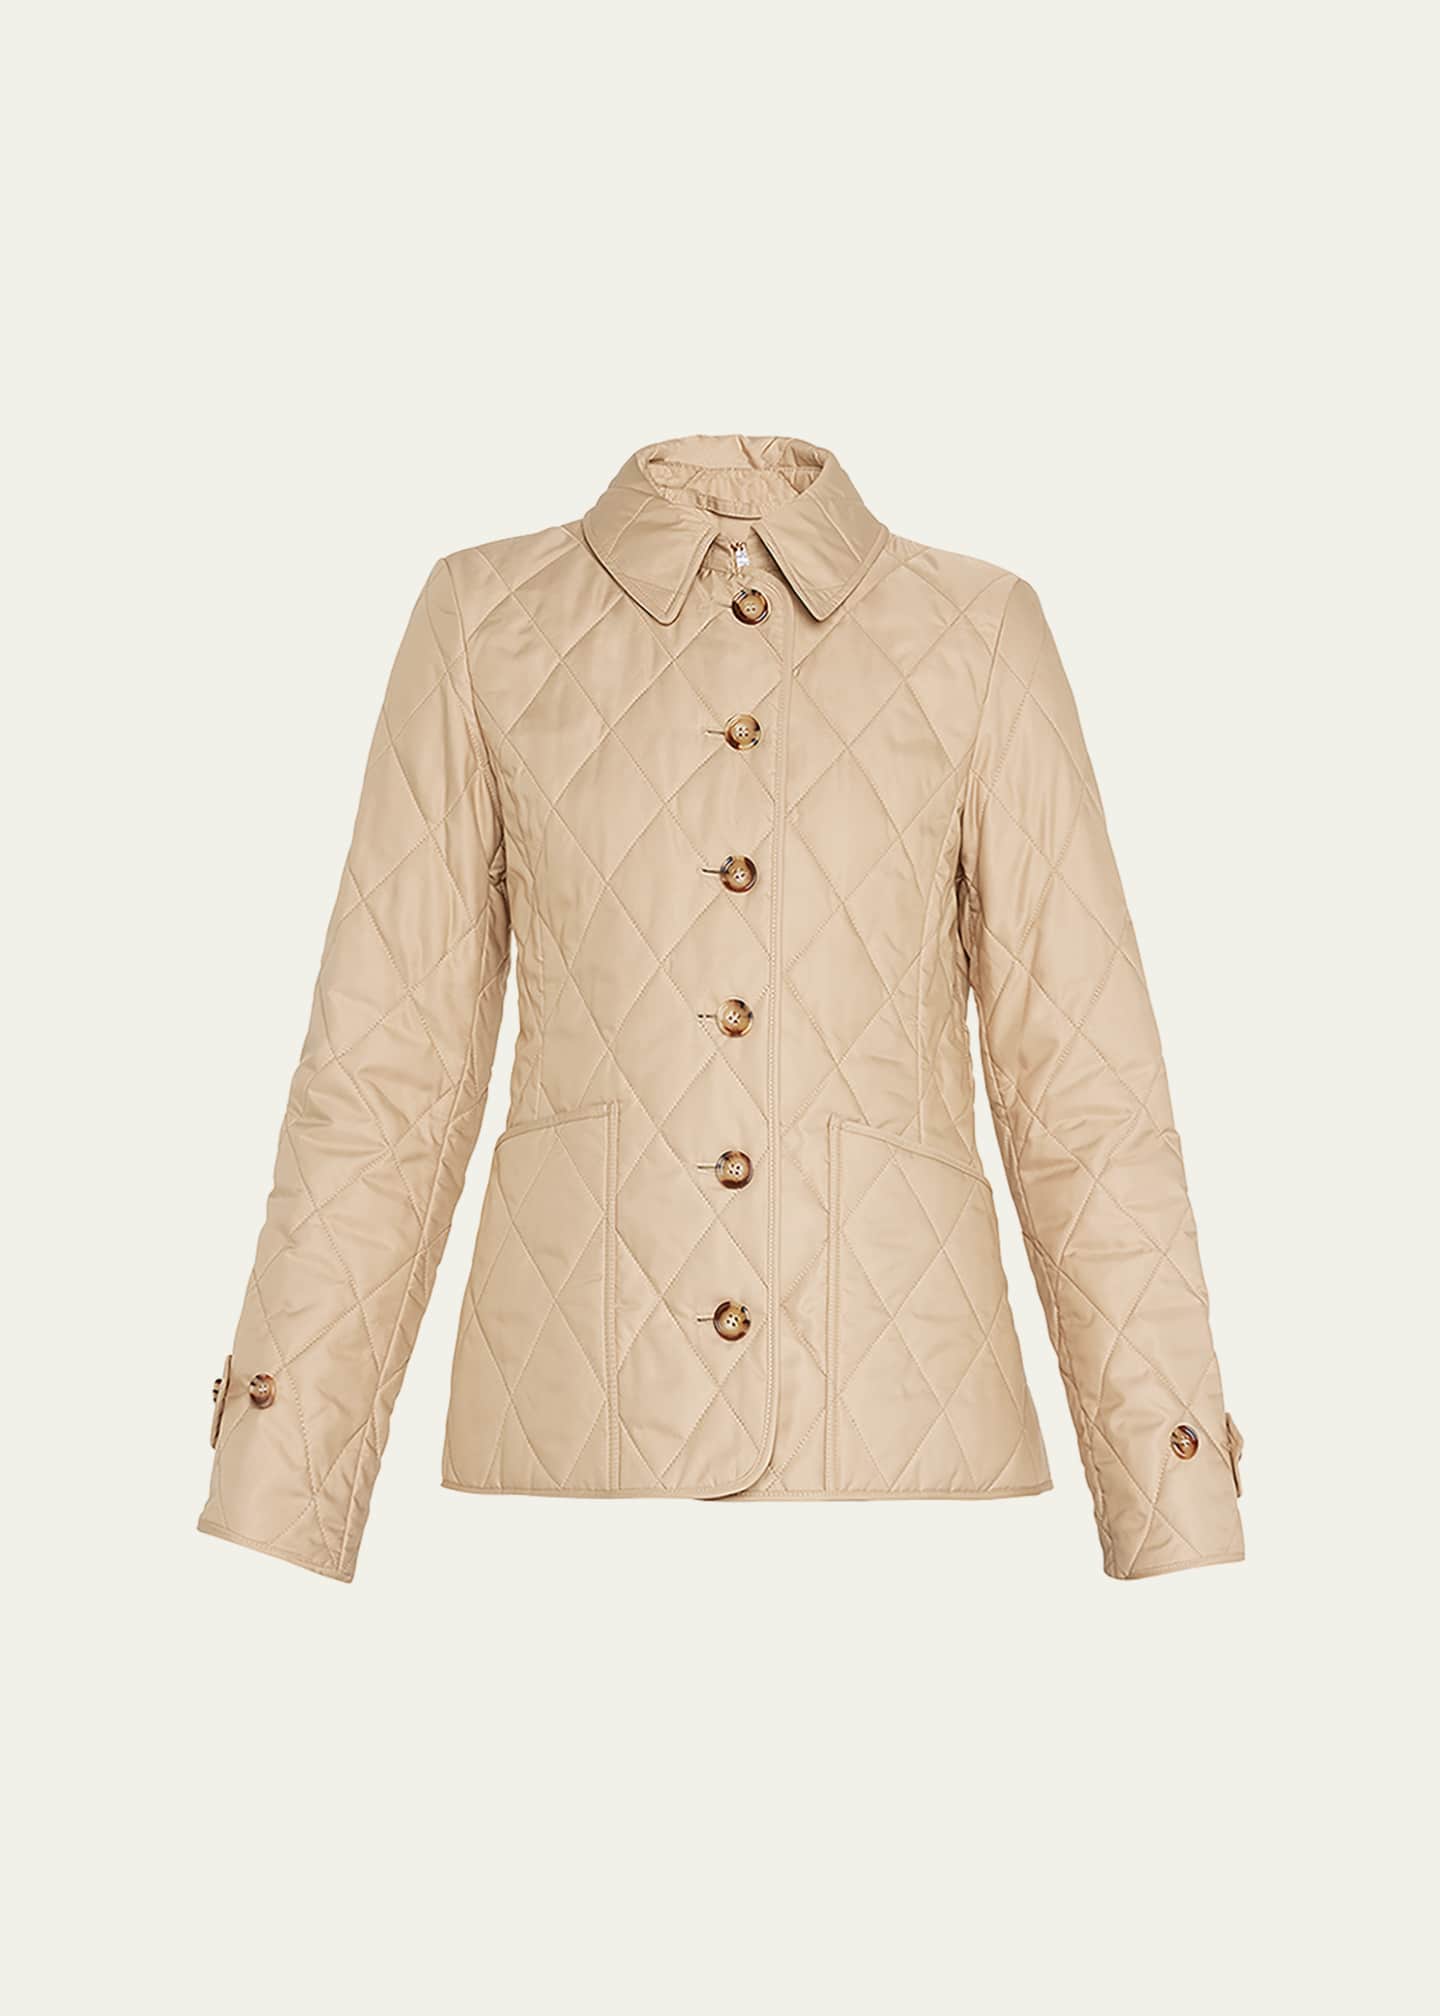 Burberry Fernleigh Diamond Quilted Jacket -